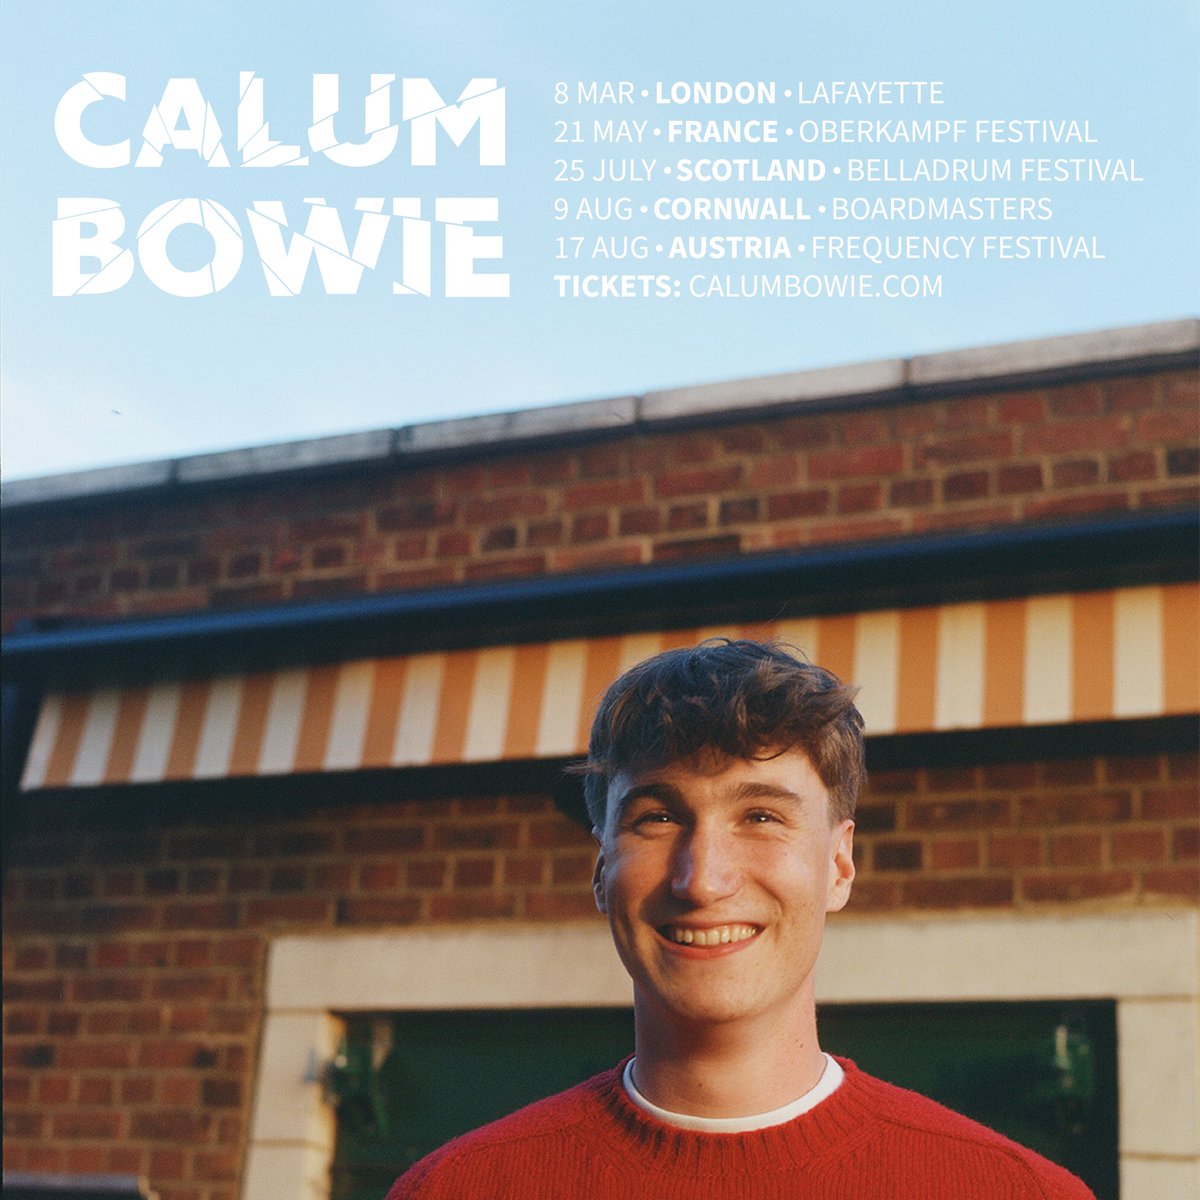 Can’t wait for these shows and festivals coming up! Here’s everywhere you can catch me this year so far 🫡 London first stop THIS FRIDAY!!🏴󠁧󠁢󠁥󠁮󠁧󠁿 All tickets at: calumbowie.com